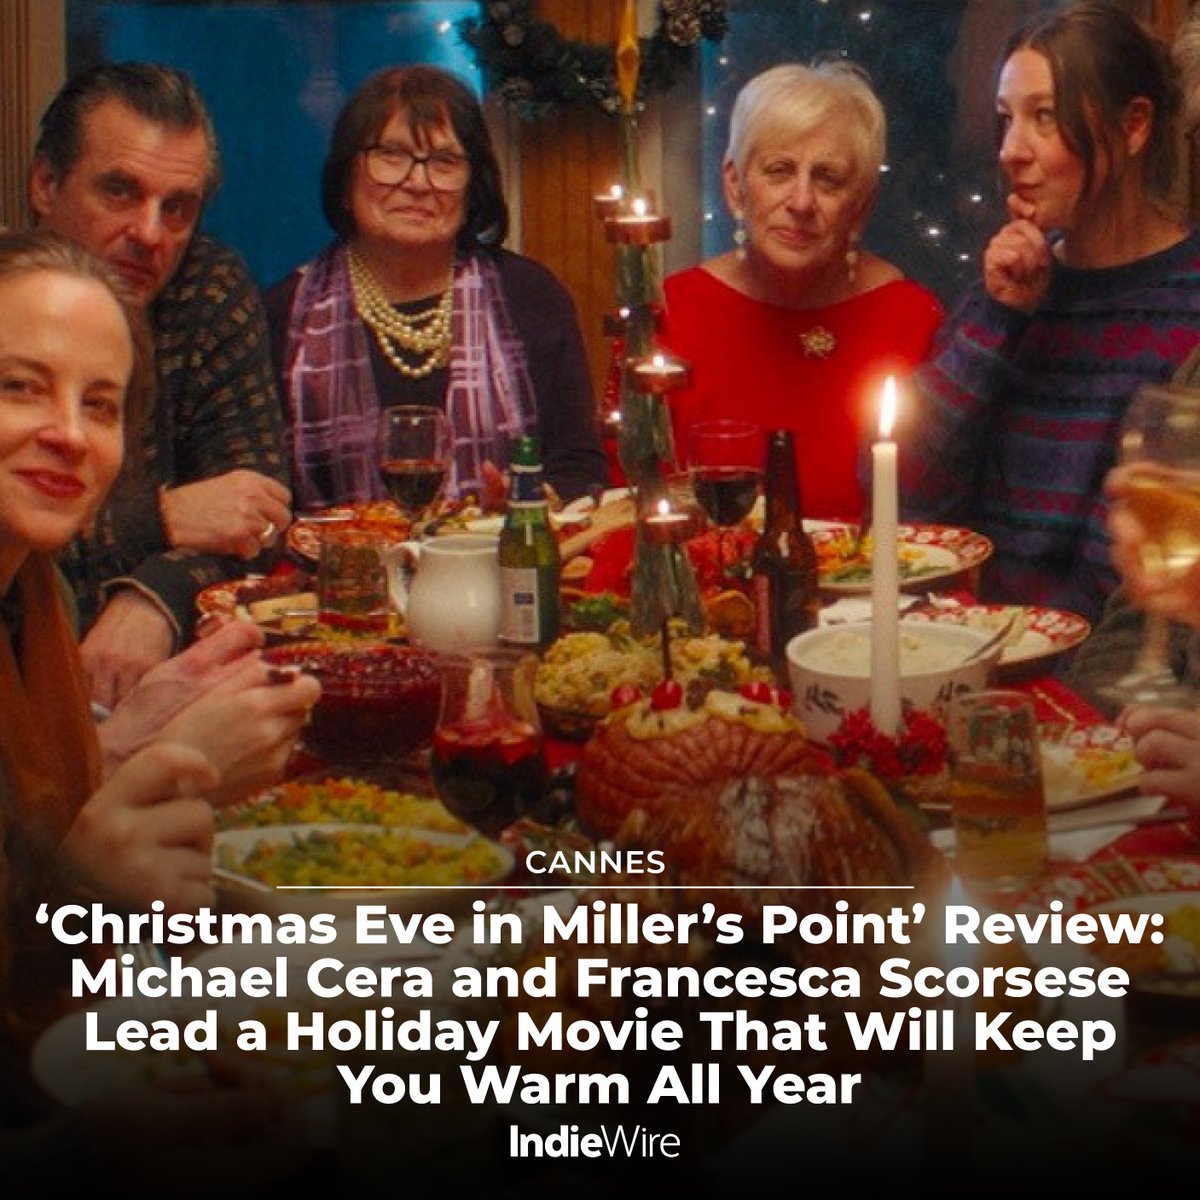 #Cannes: All vibes and no plot, Tyler Taormina's wry but melancholy ensemble comedy knows why the holidays always hit us right in the heart. Read our review for 'Christmas Eve in Miller’s Point' here: trib.al/mQB0gHW